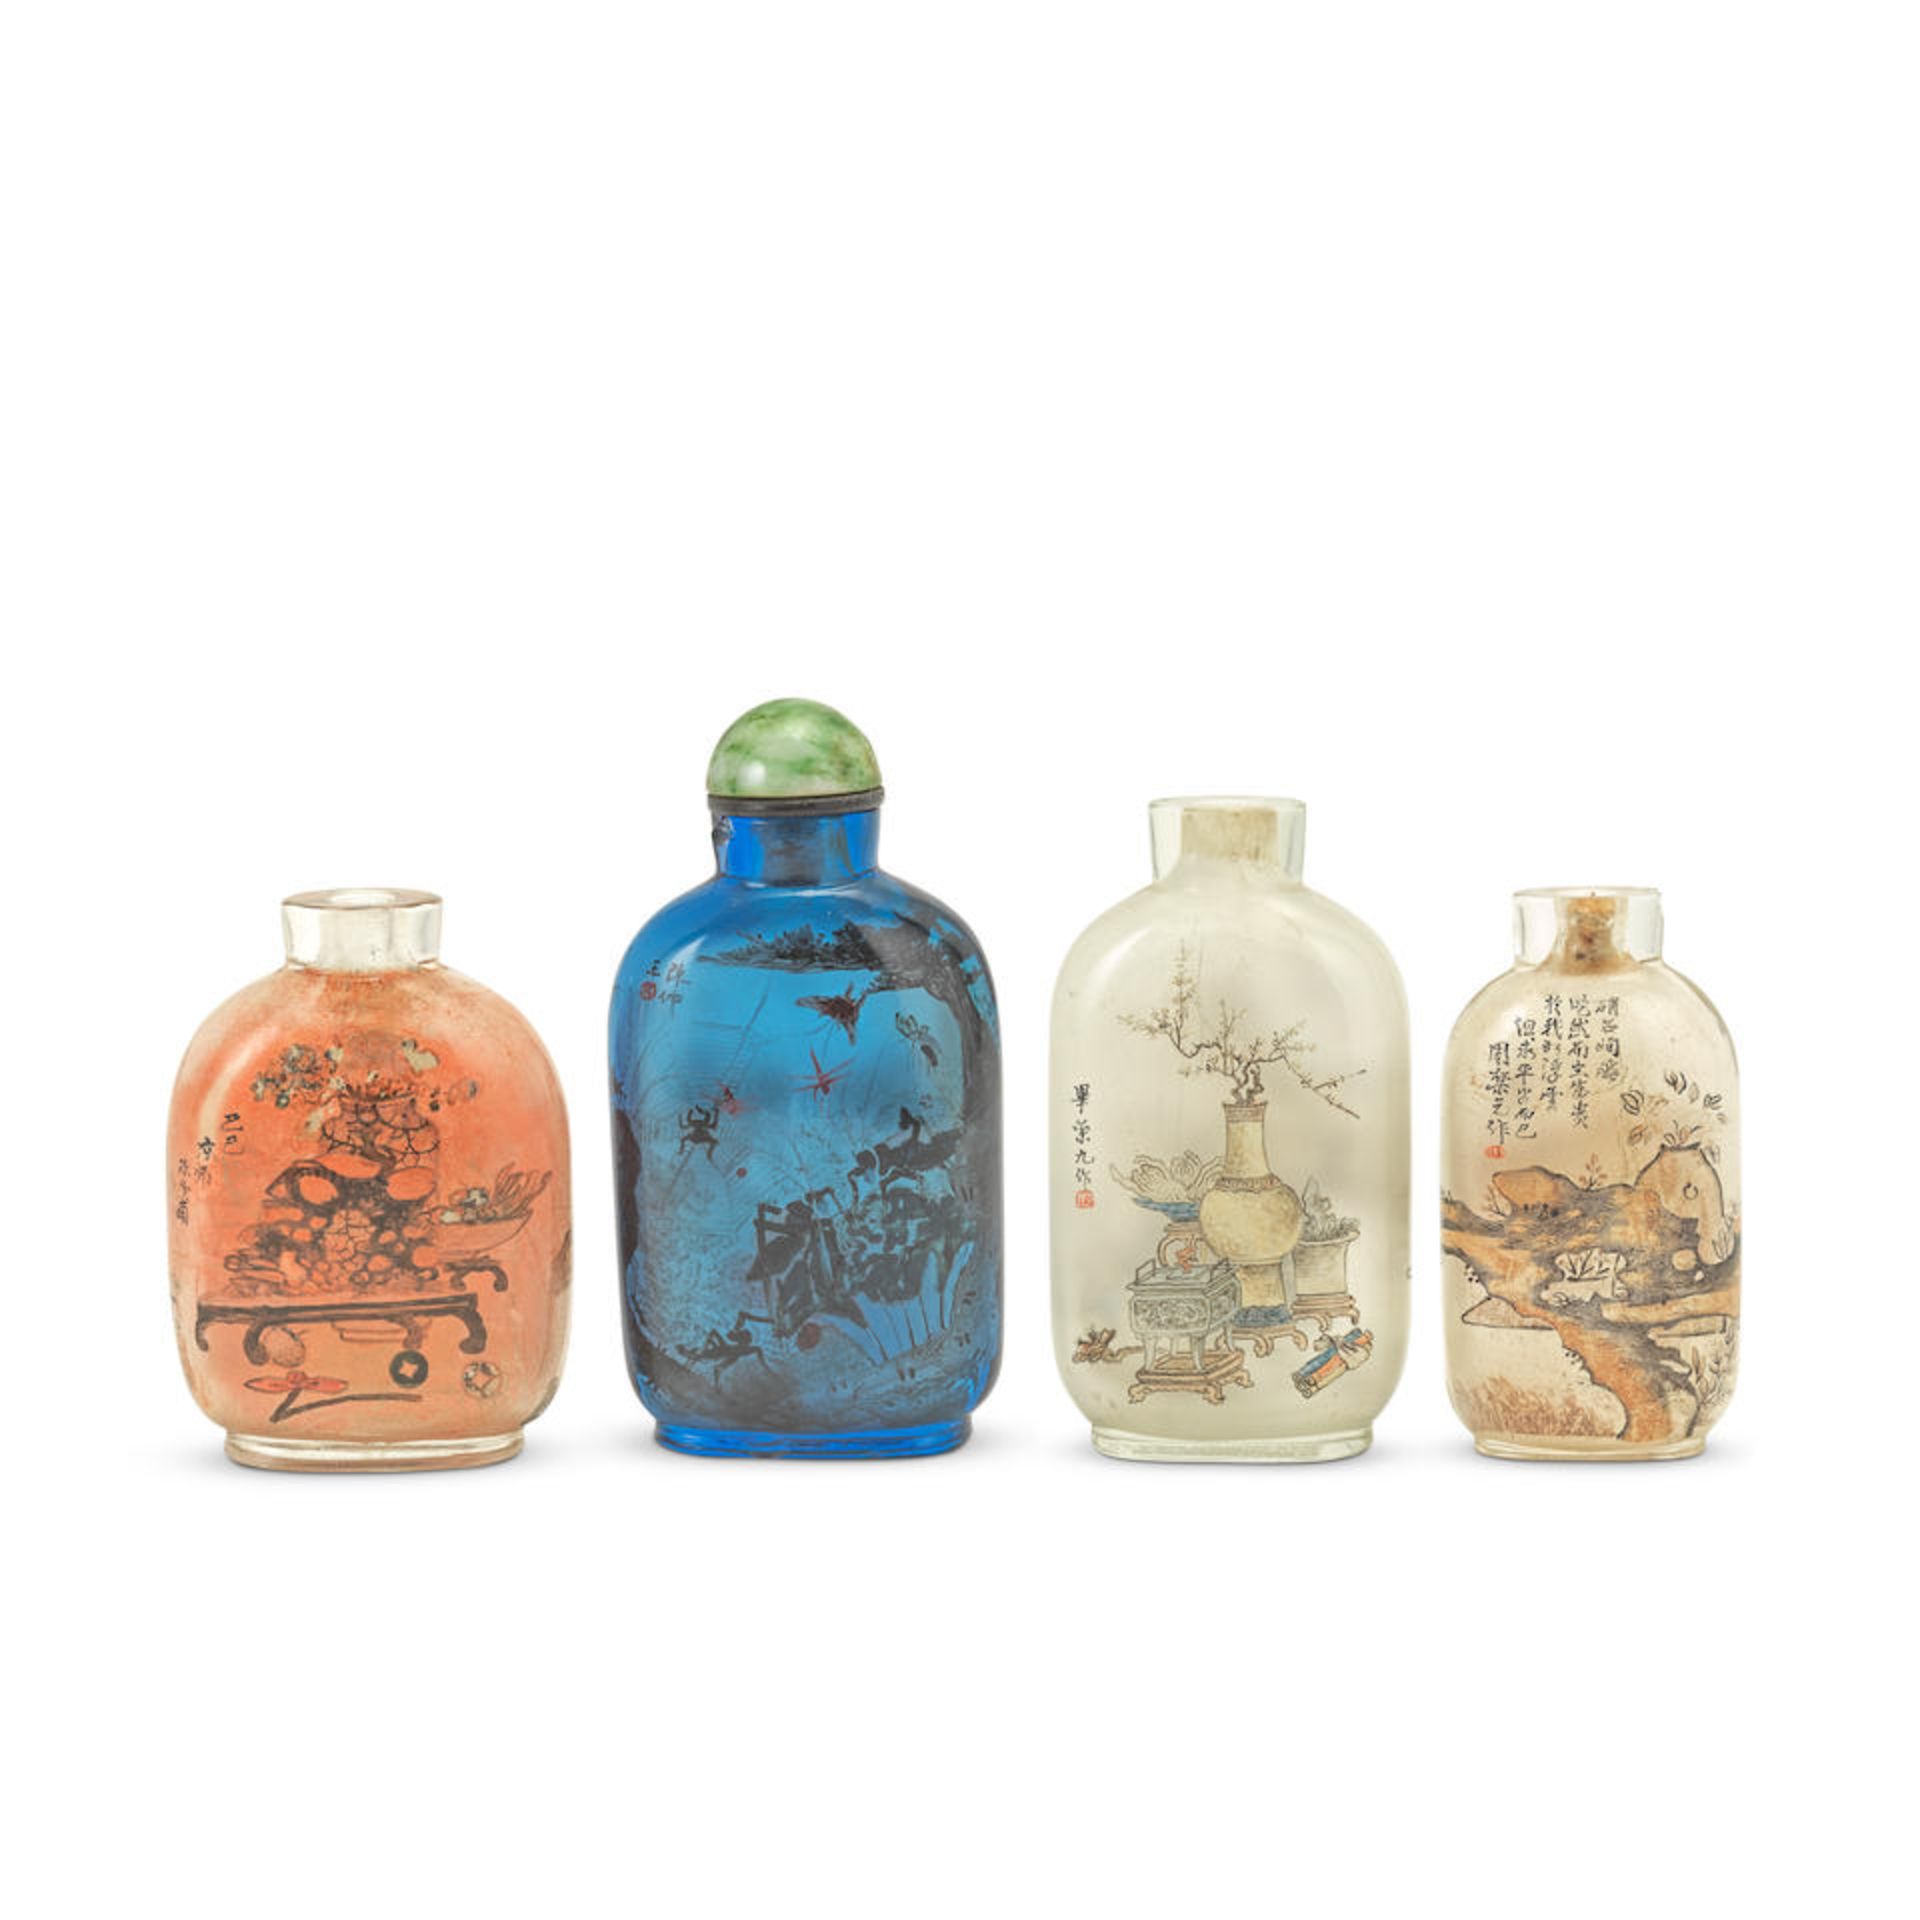 FOUR INSIDE-PAINTED GLASS SNUFF BOTTLES Variously signed Chen Shaofu, Bi Rongjiu (1874-1925) and...